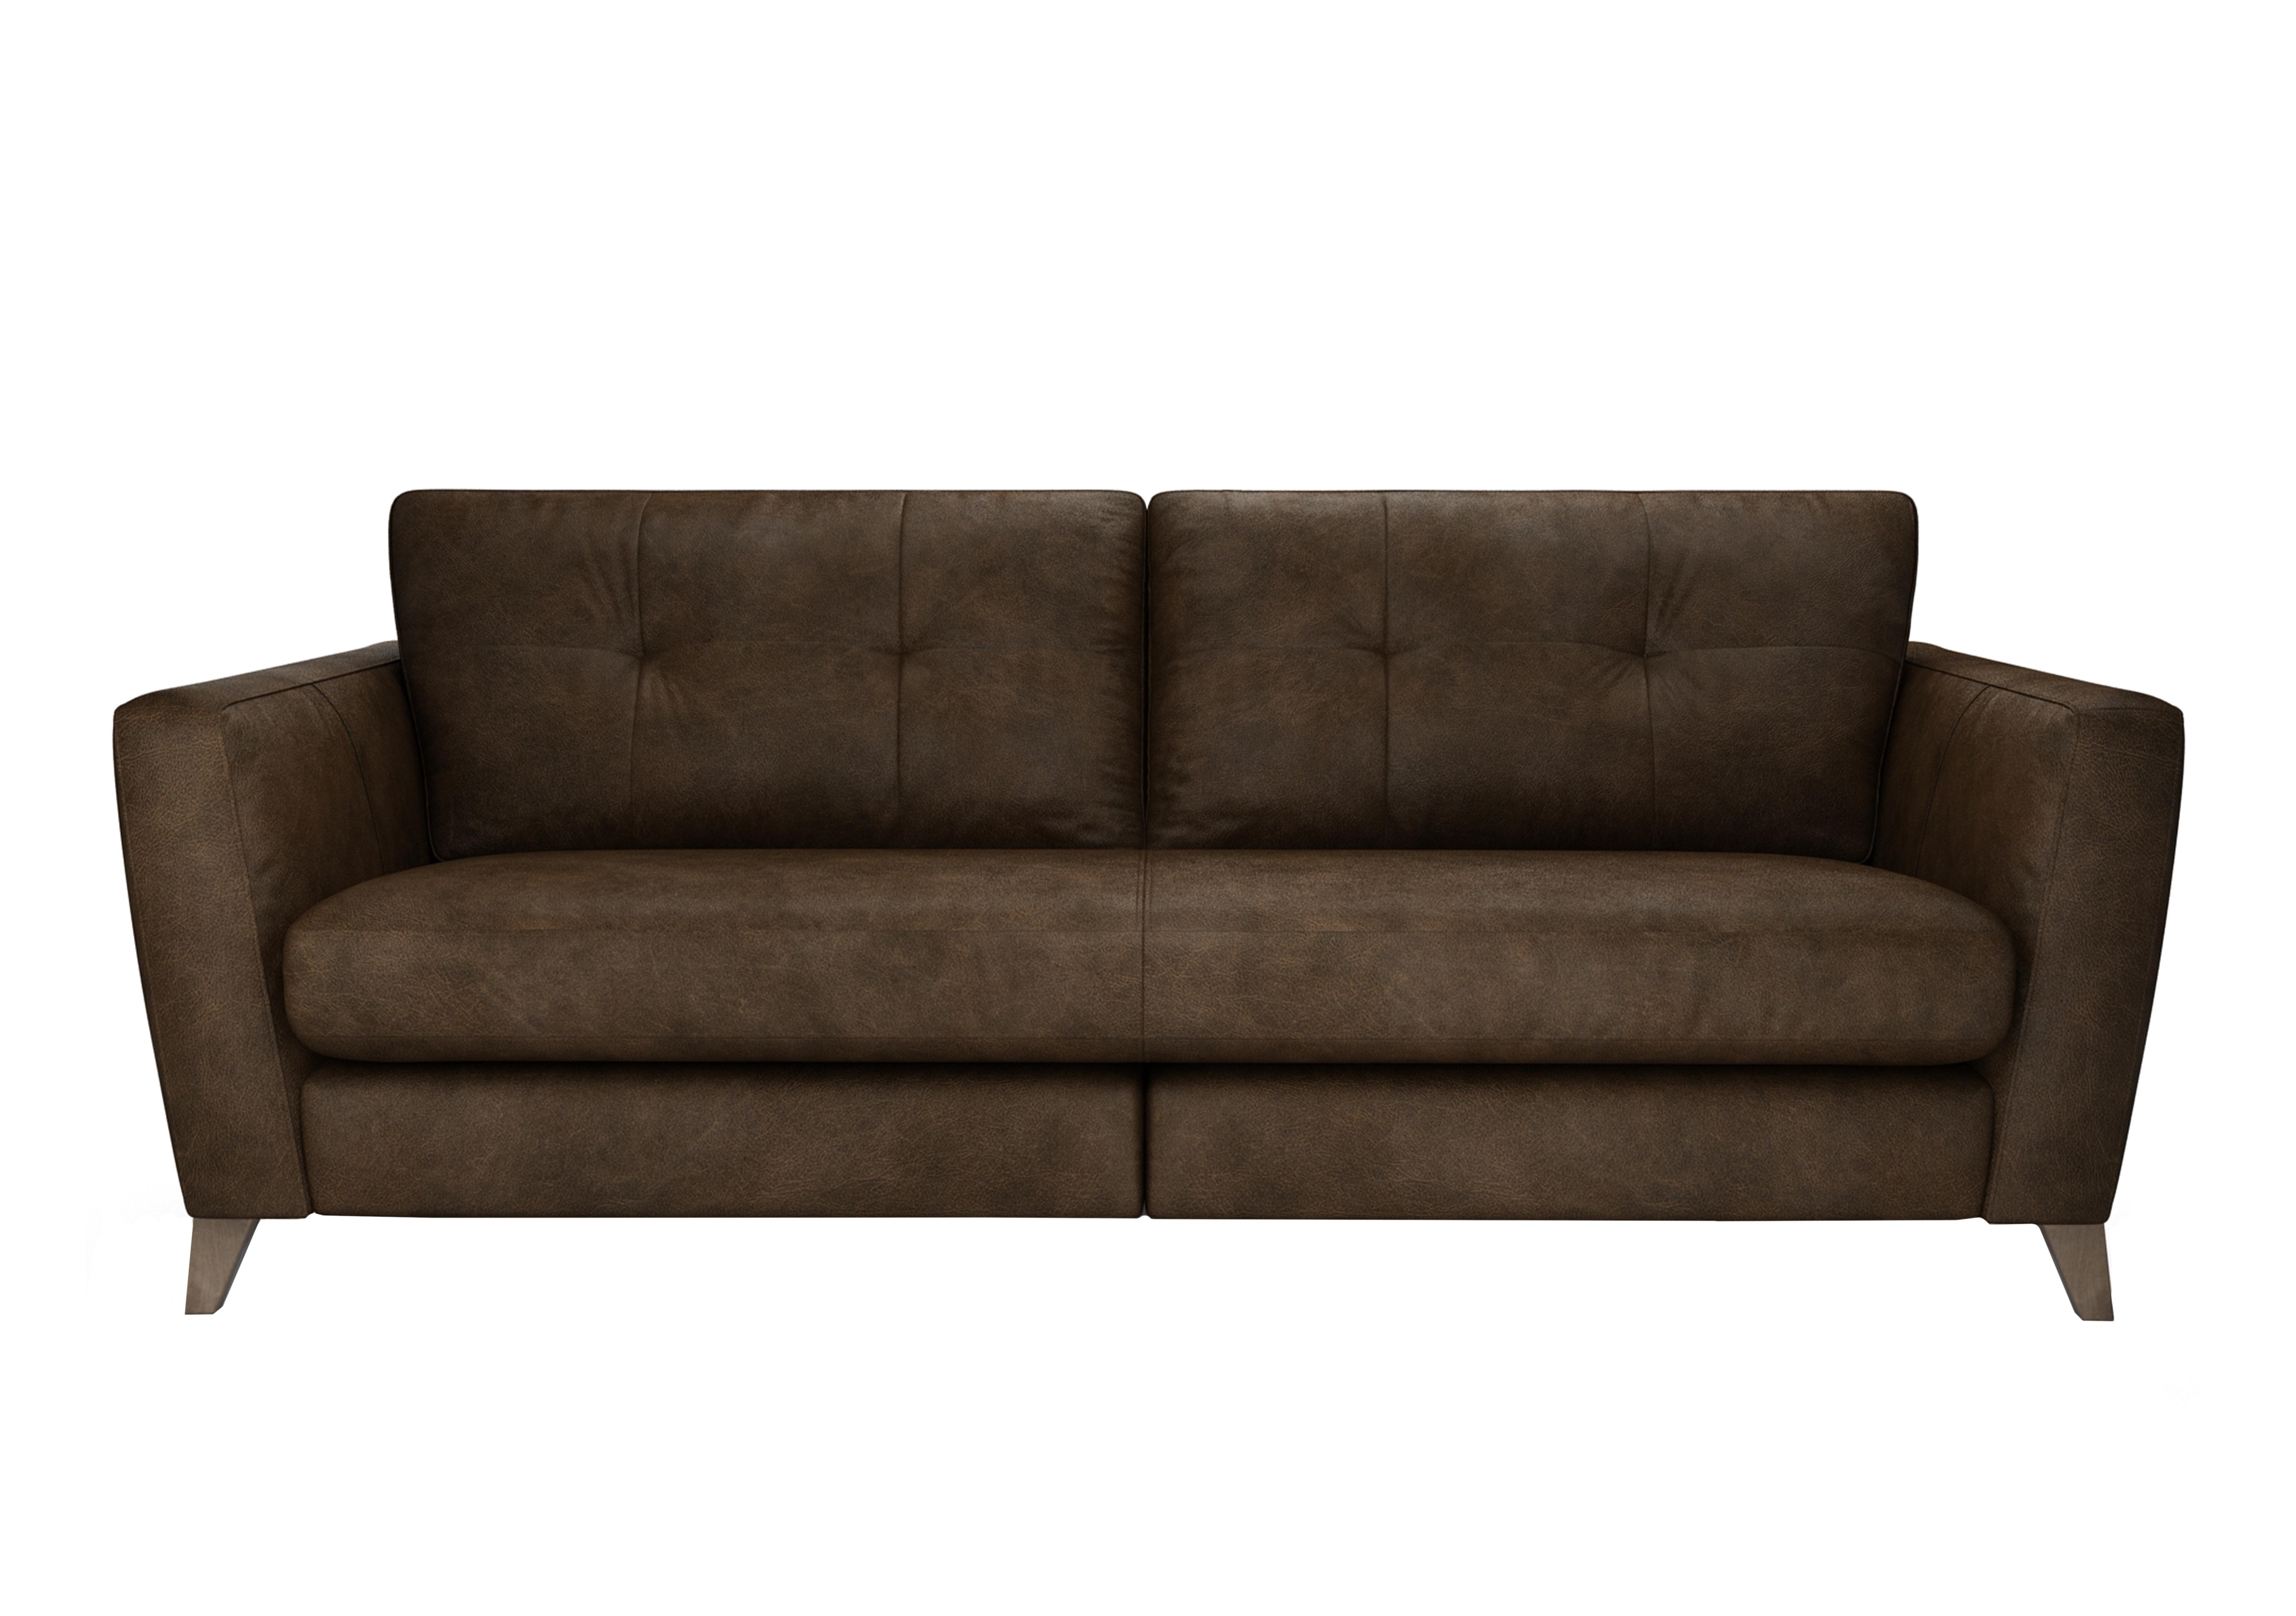 Hermione 4 Seater Leather Sofa in Bou192 Bourbon Wo Ft on Furniture Village